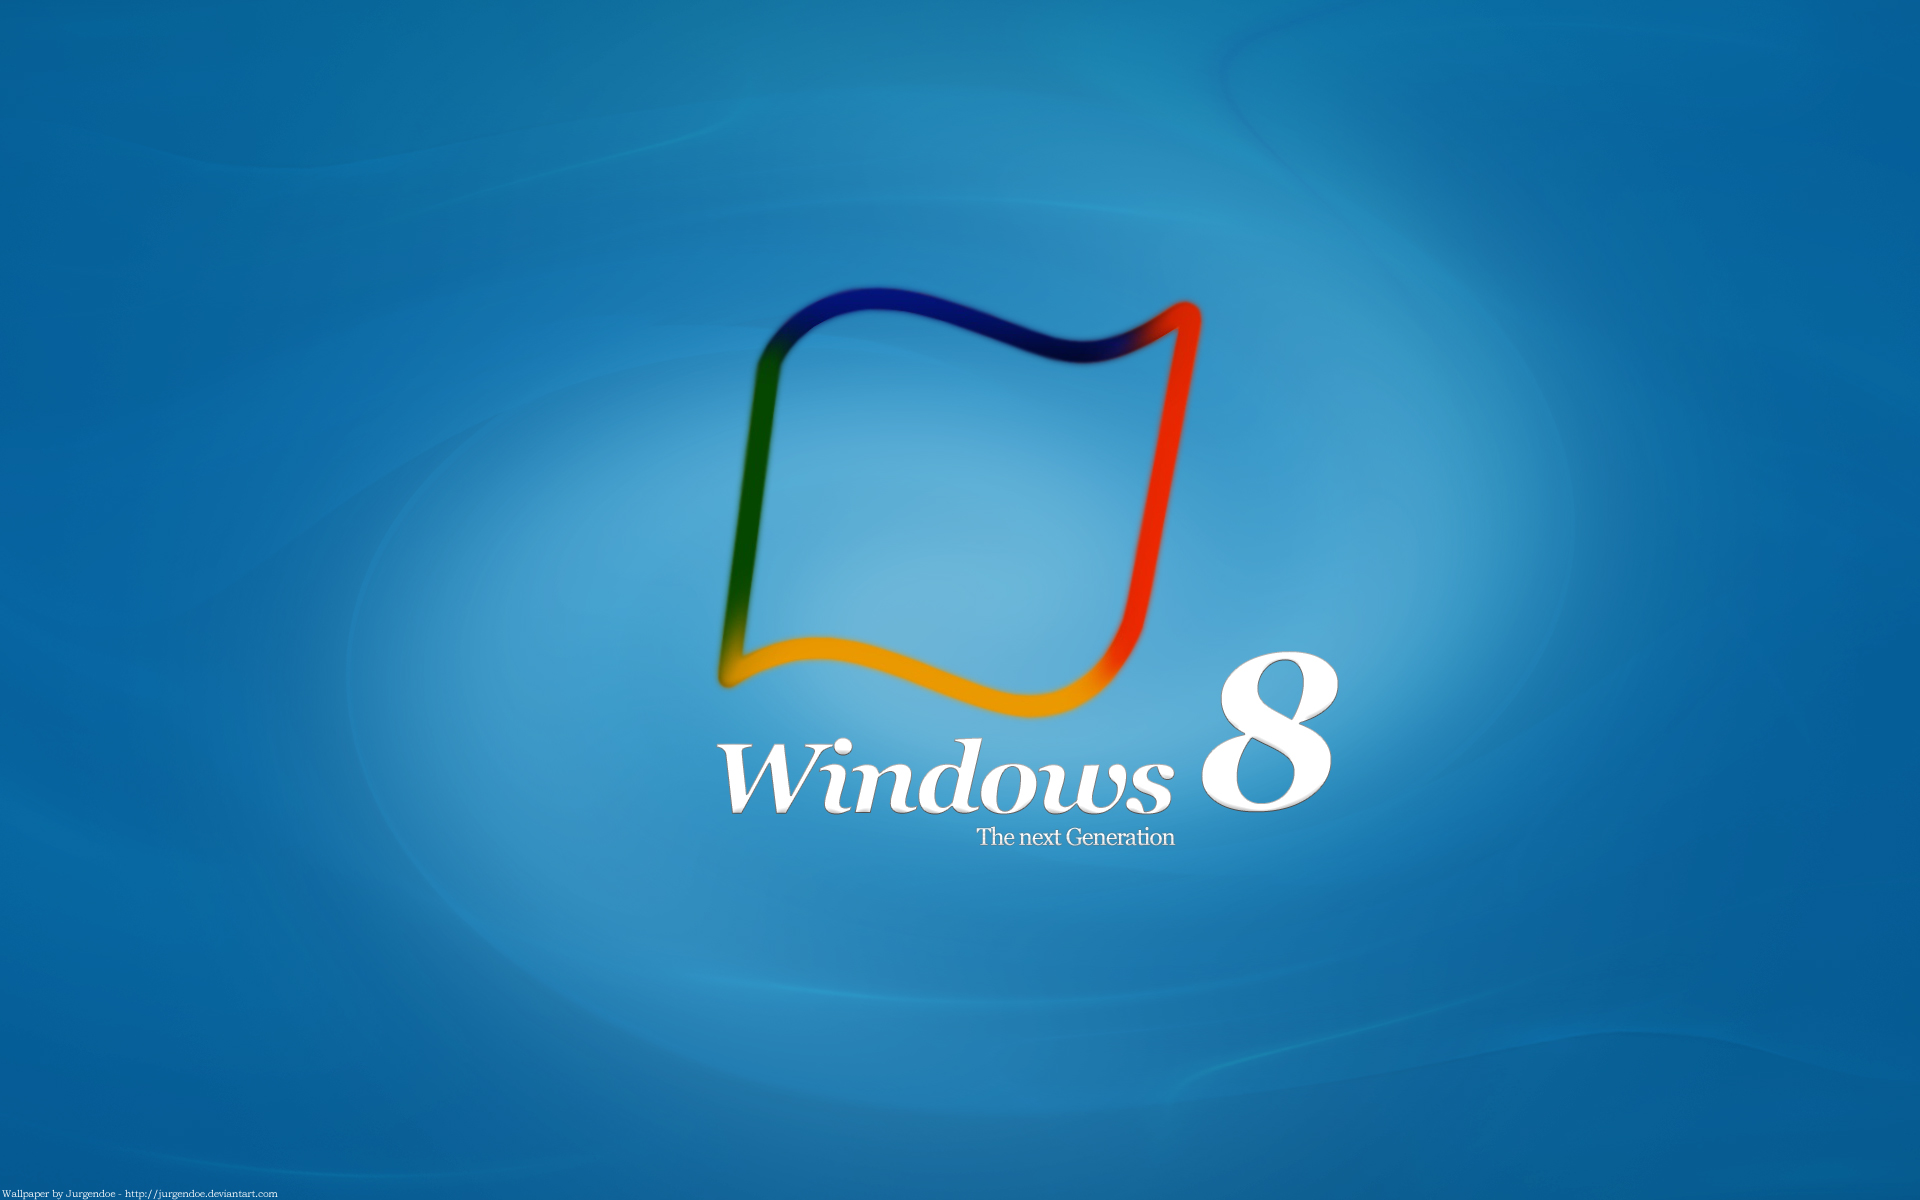 Download these 44 HD Windows 8 Wallpaper Images